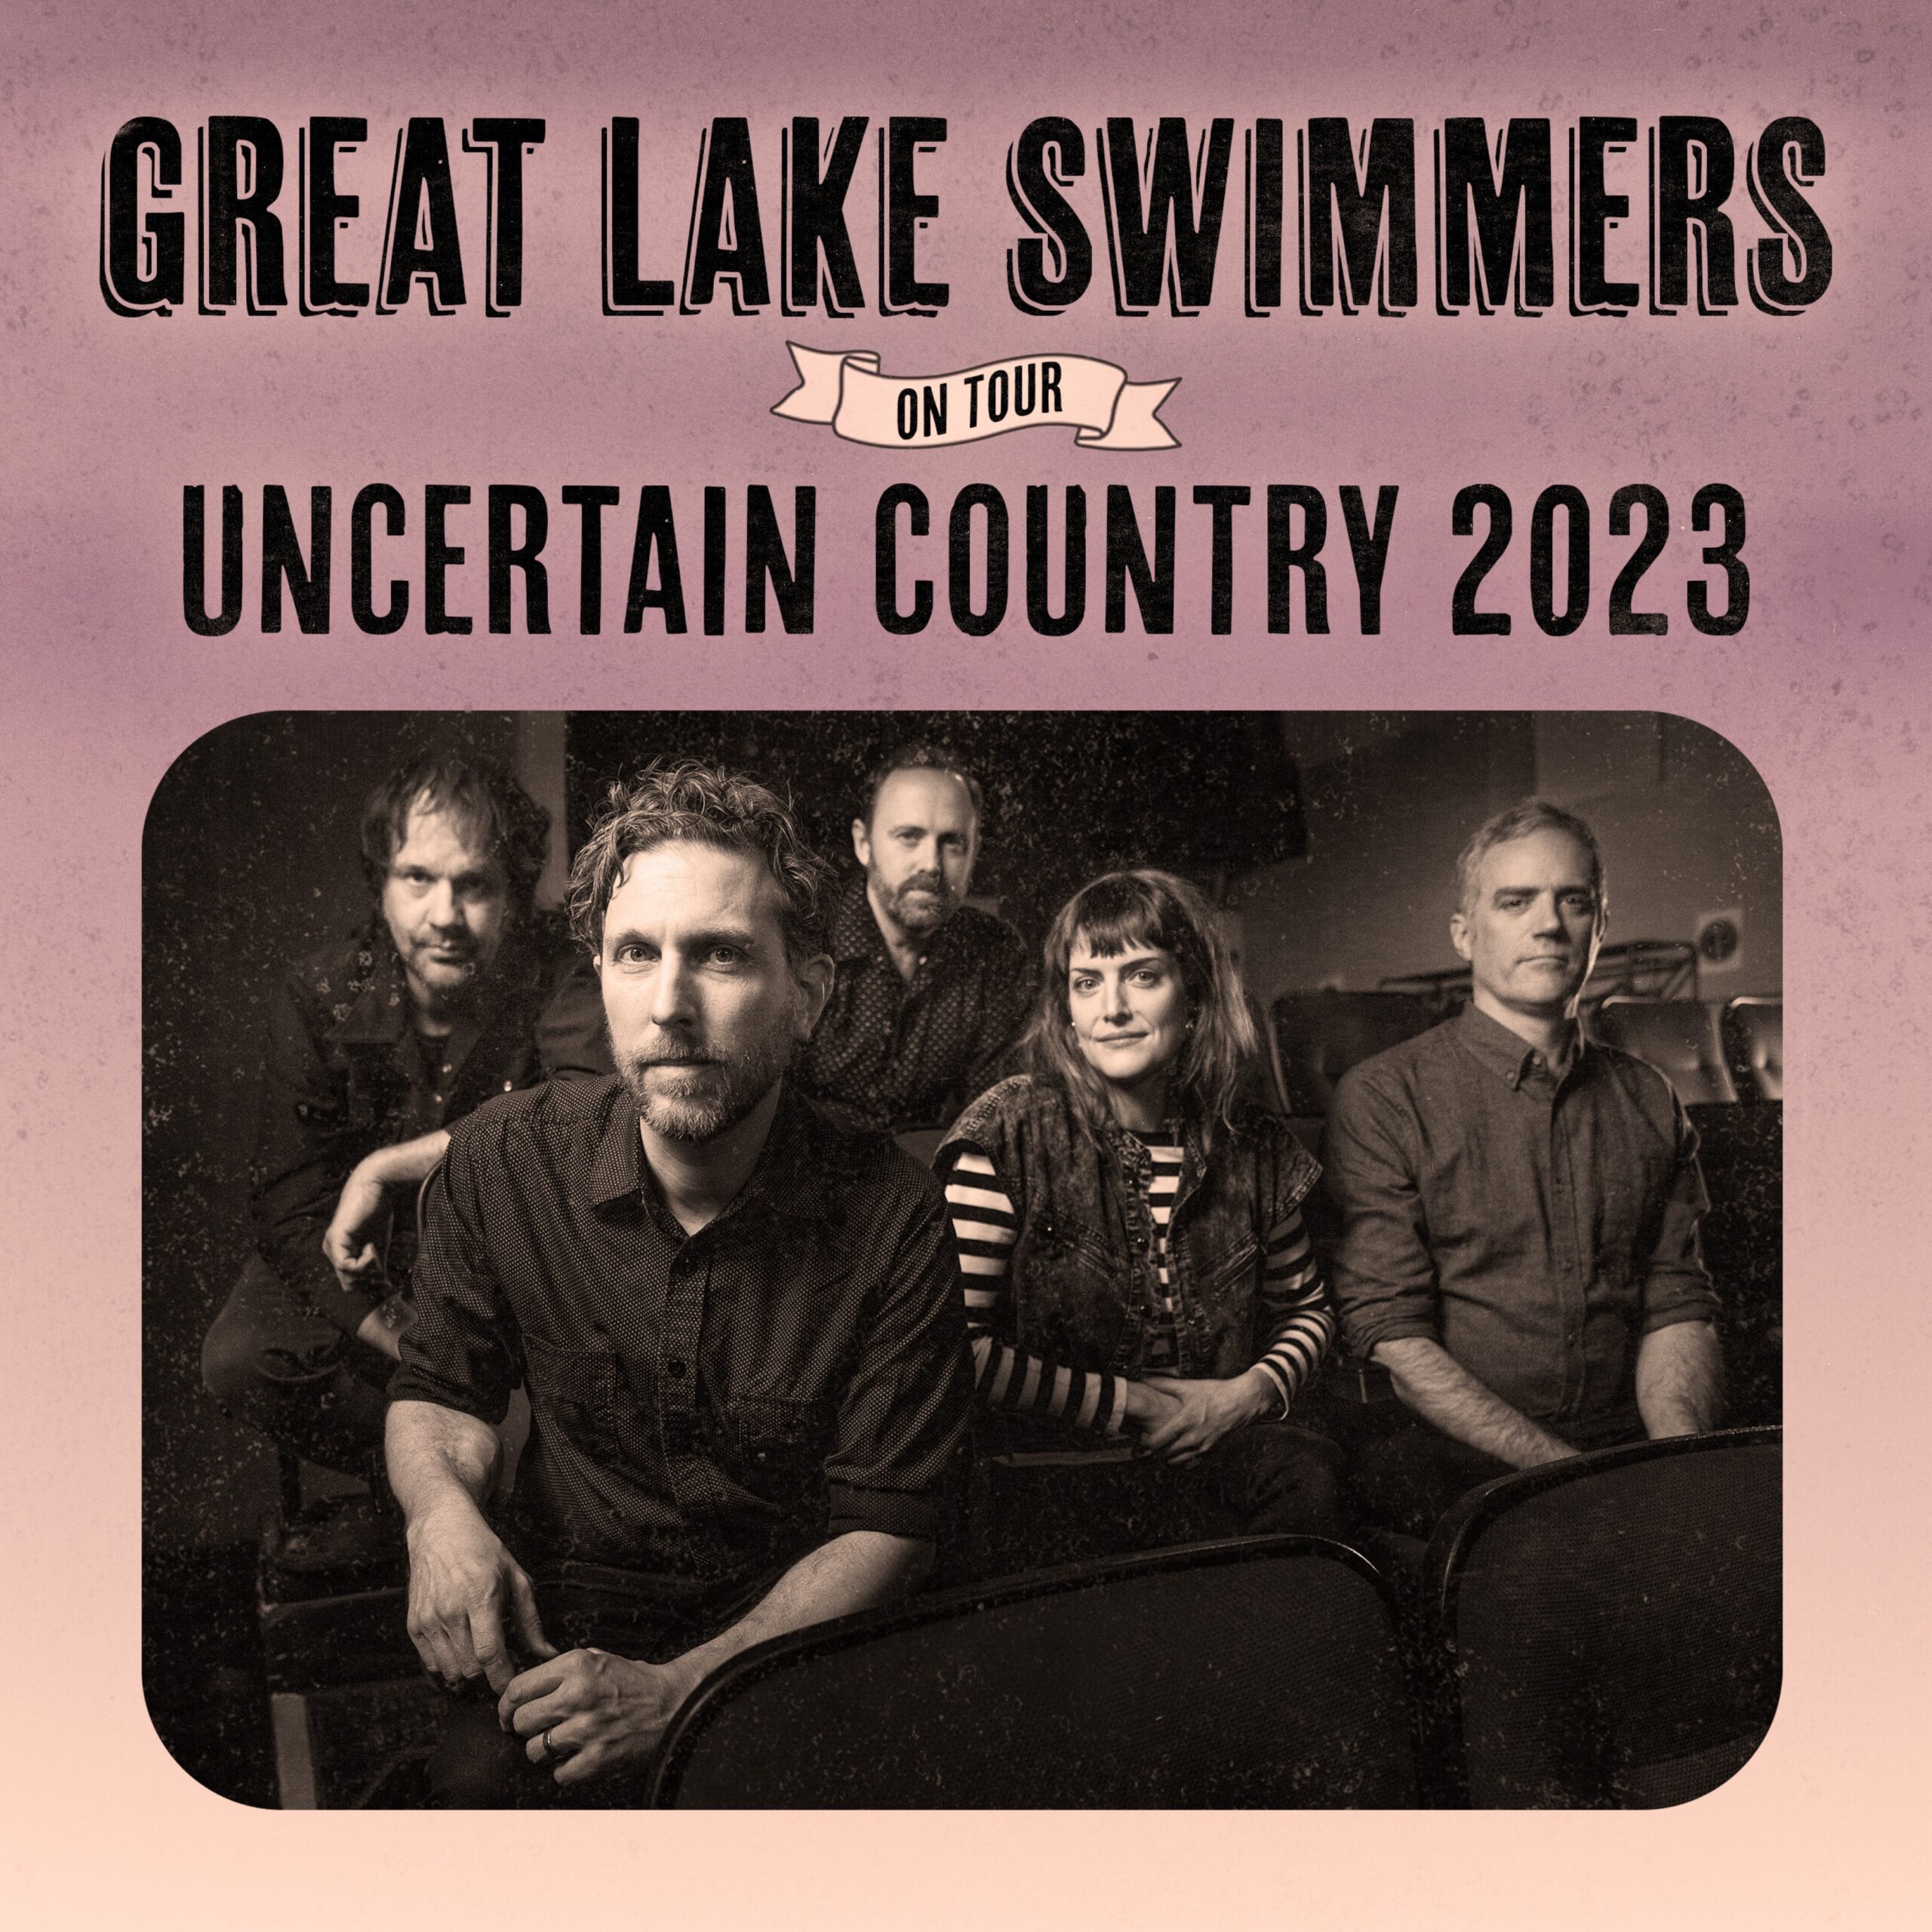 Great lake swimmers